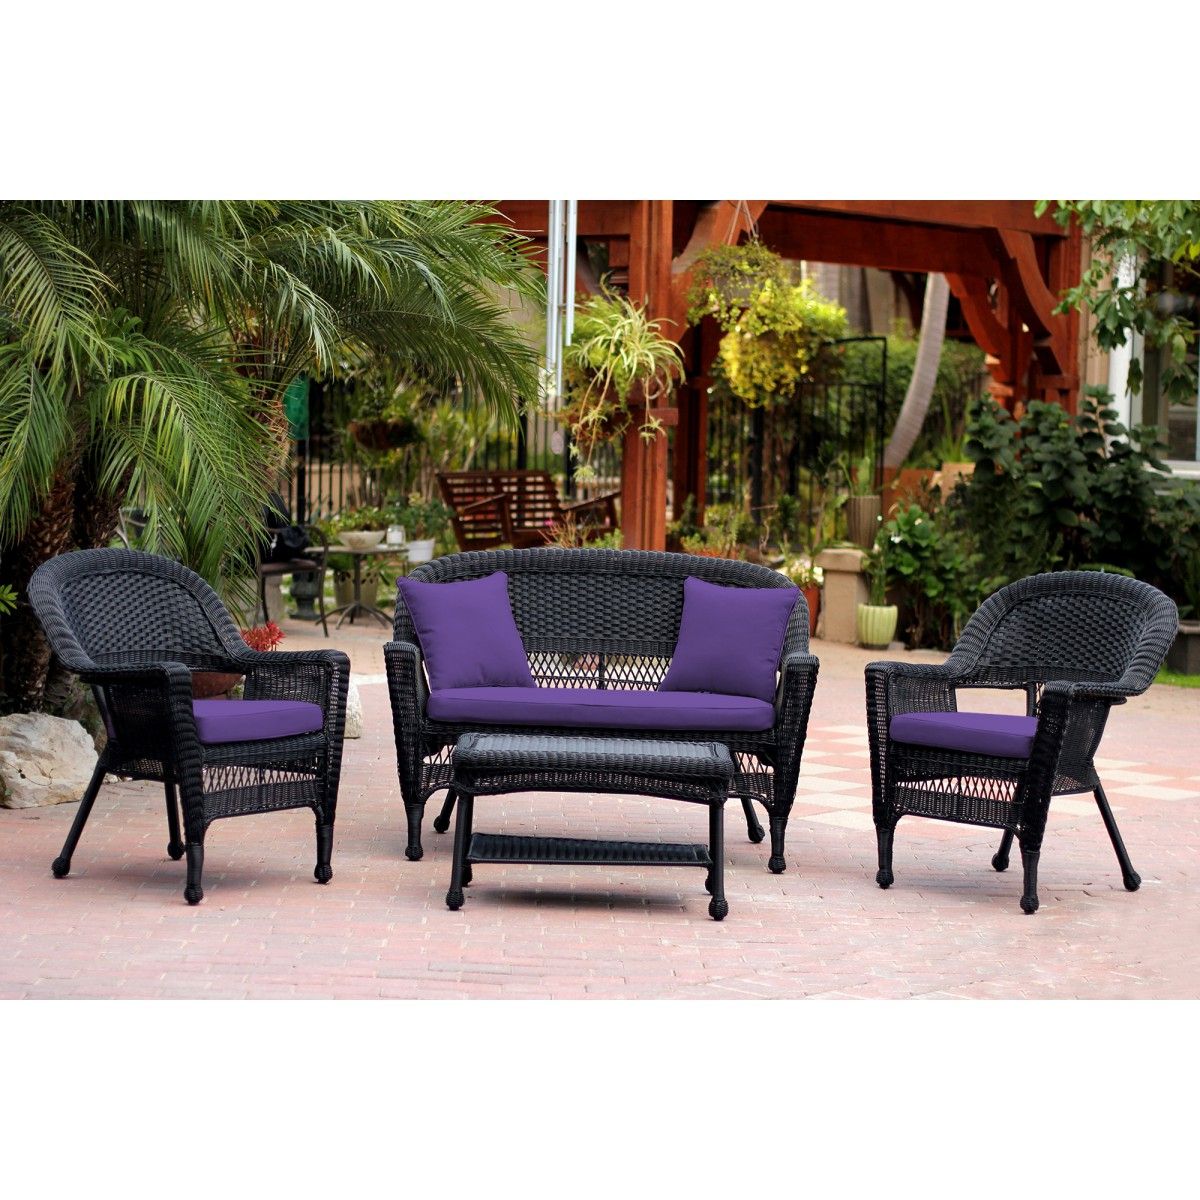 Black Cushion Patio Conversation Sets Pertaining To Well Liked 4pc Black Wicker Conversation Set – Purple Cushion (View 12 of 15)